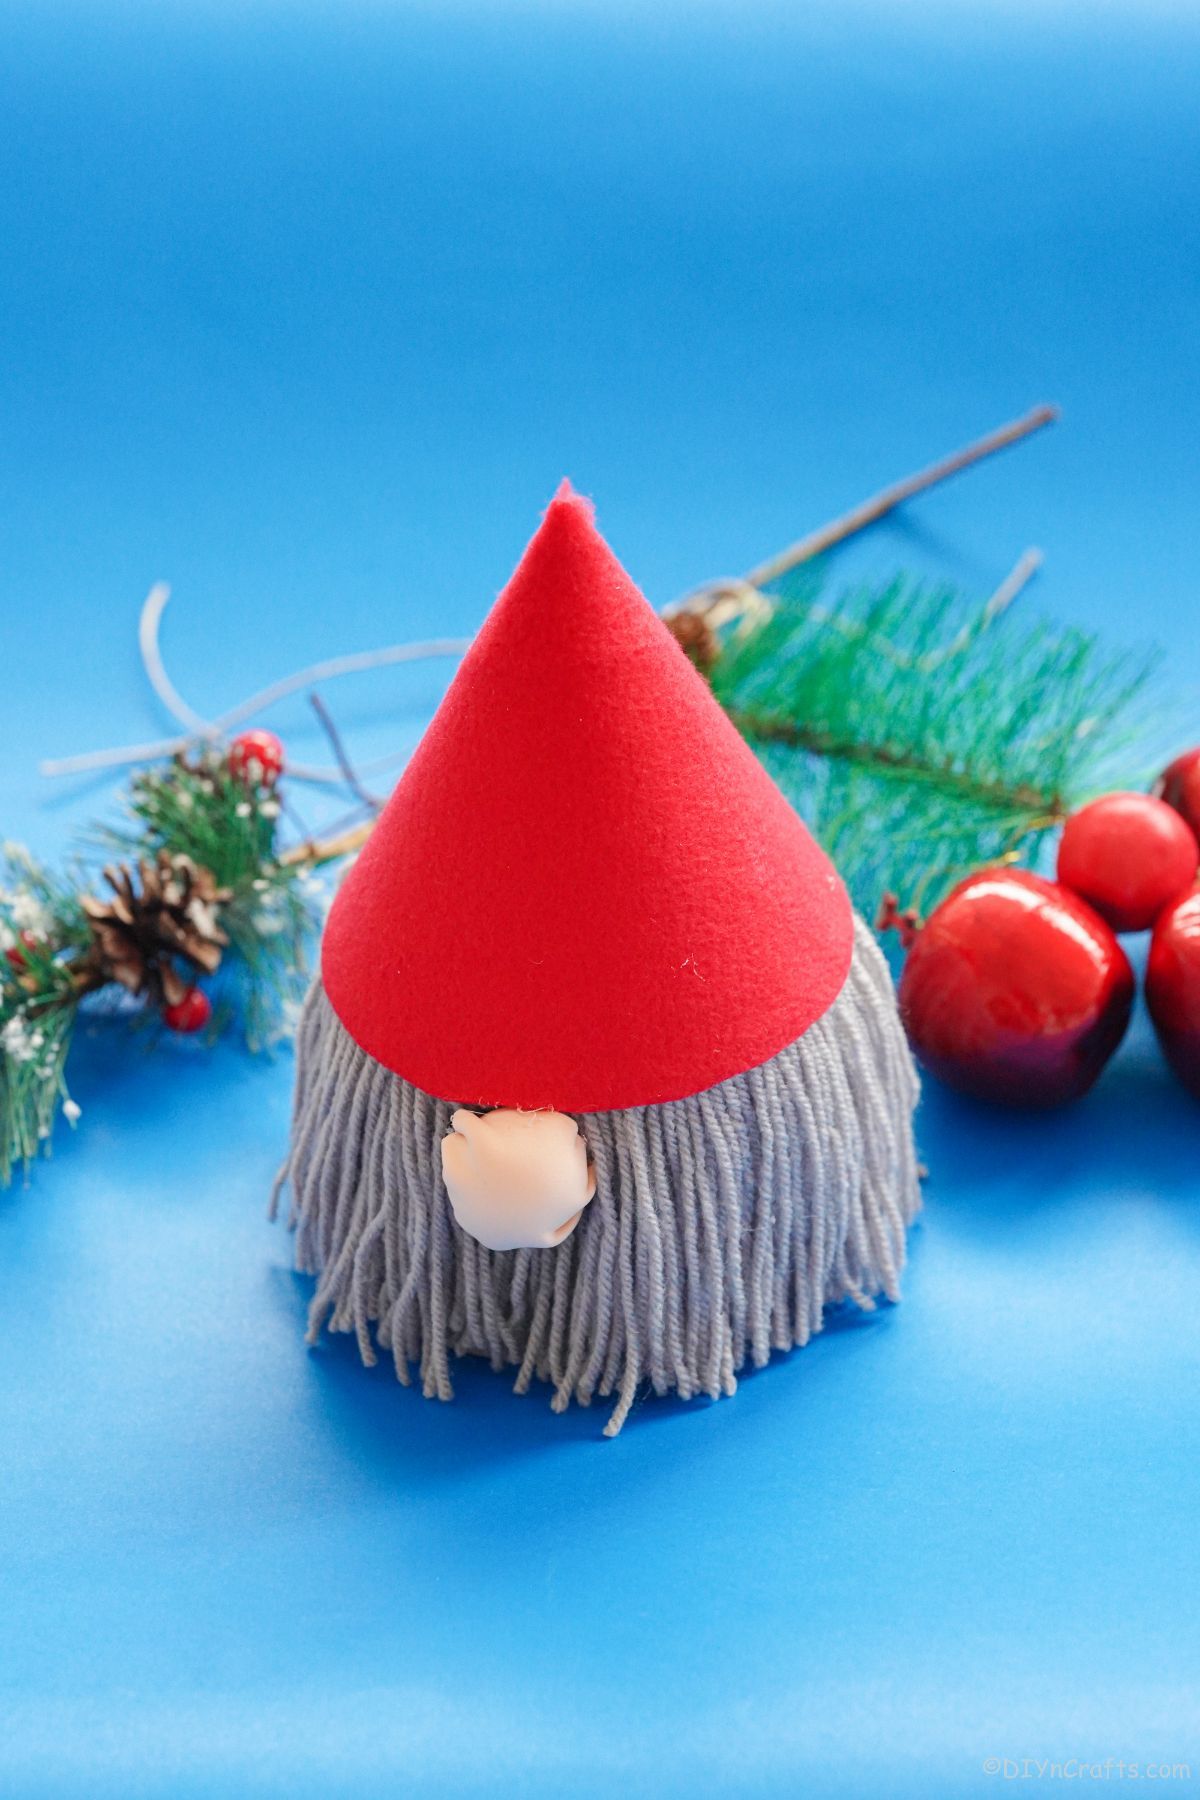 gnome with red hat on blue table